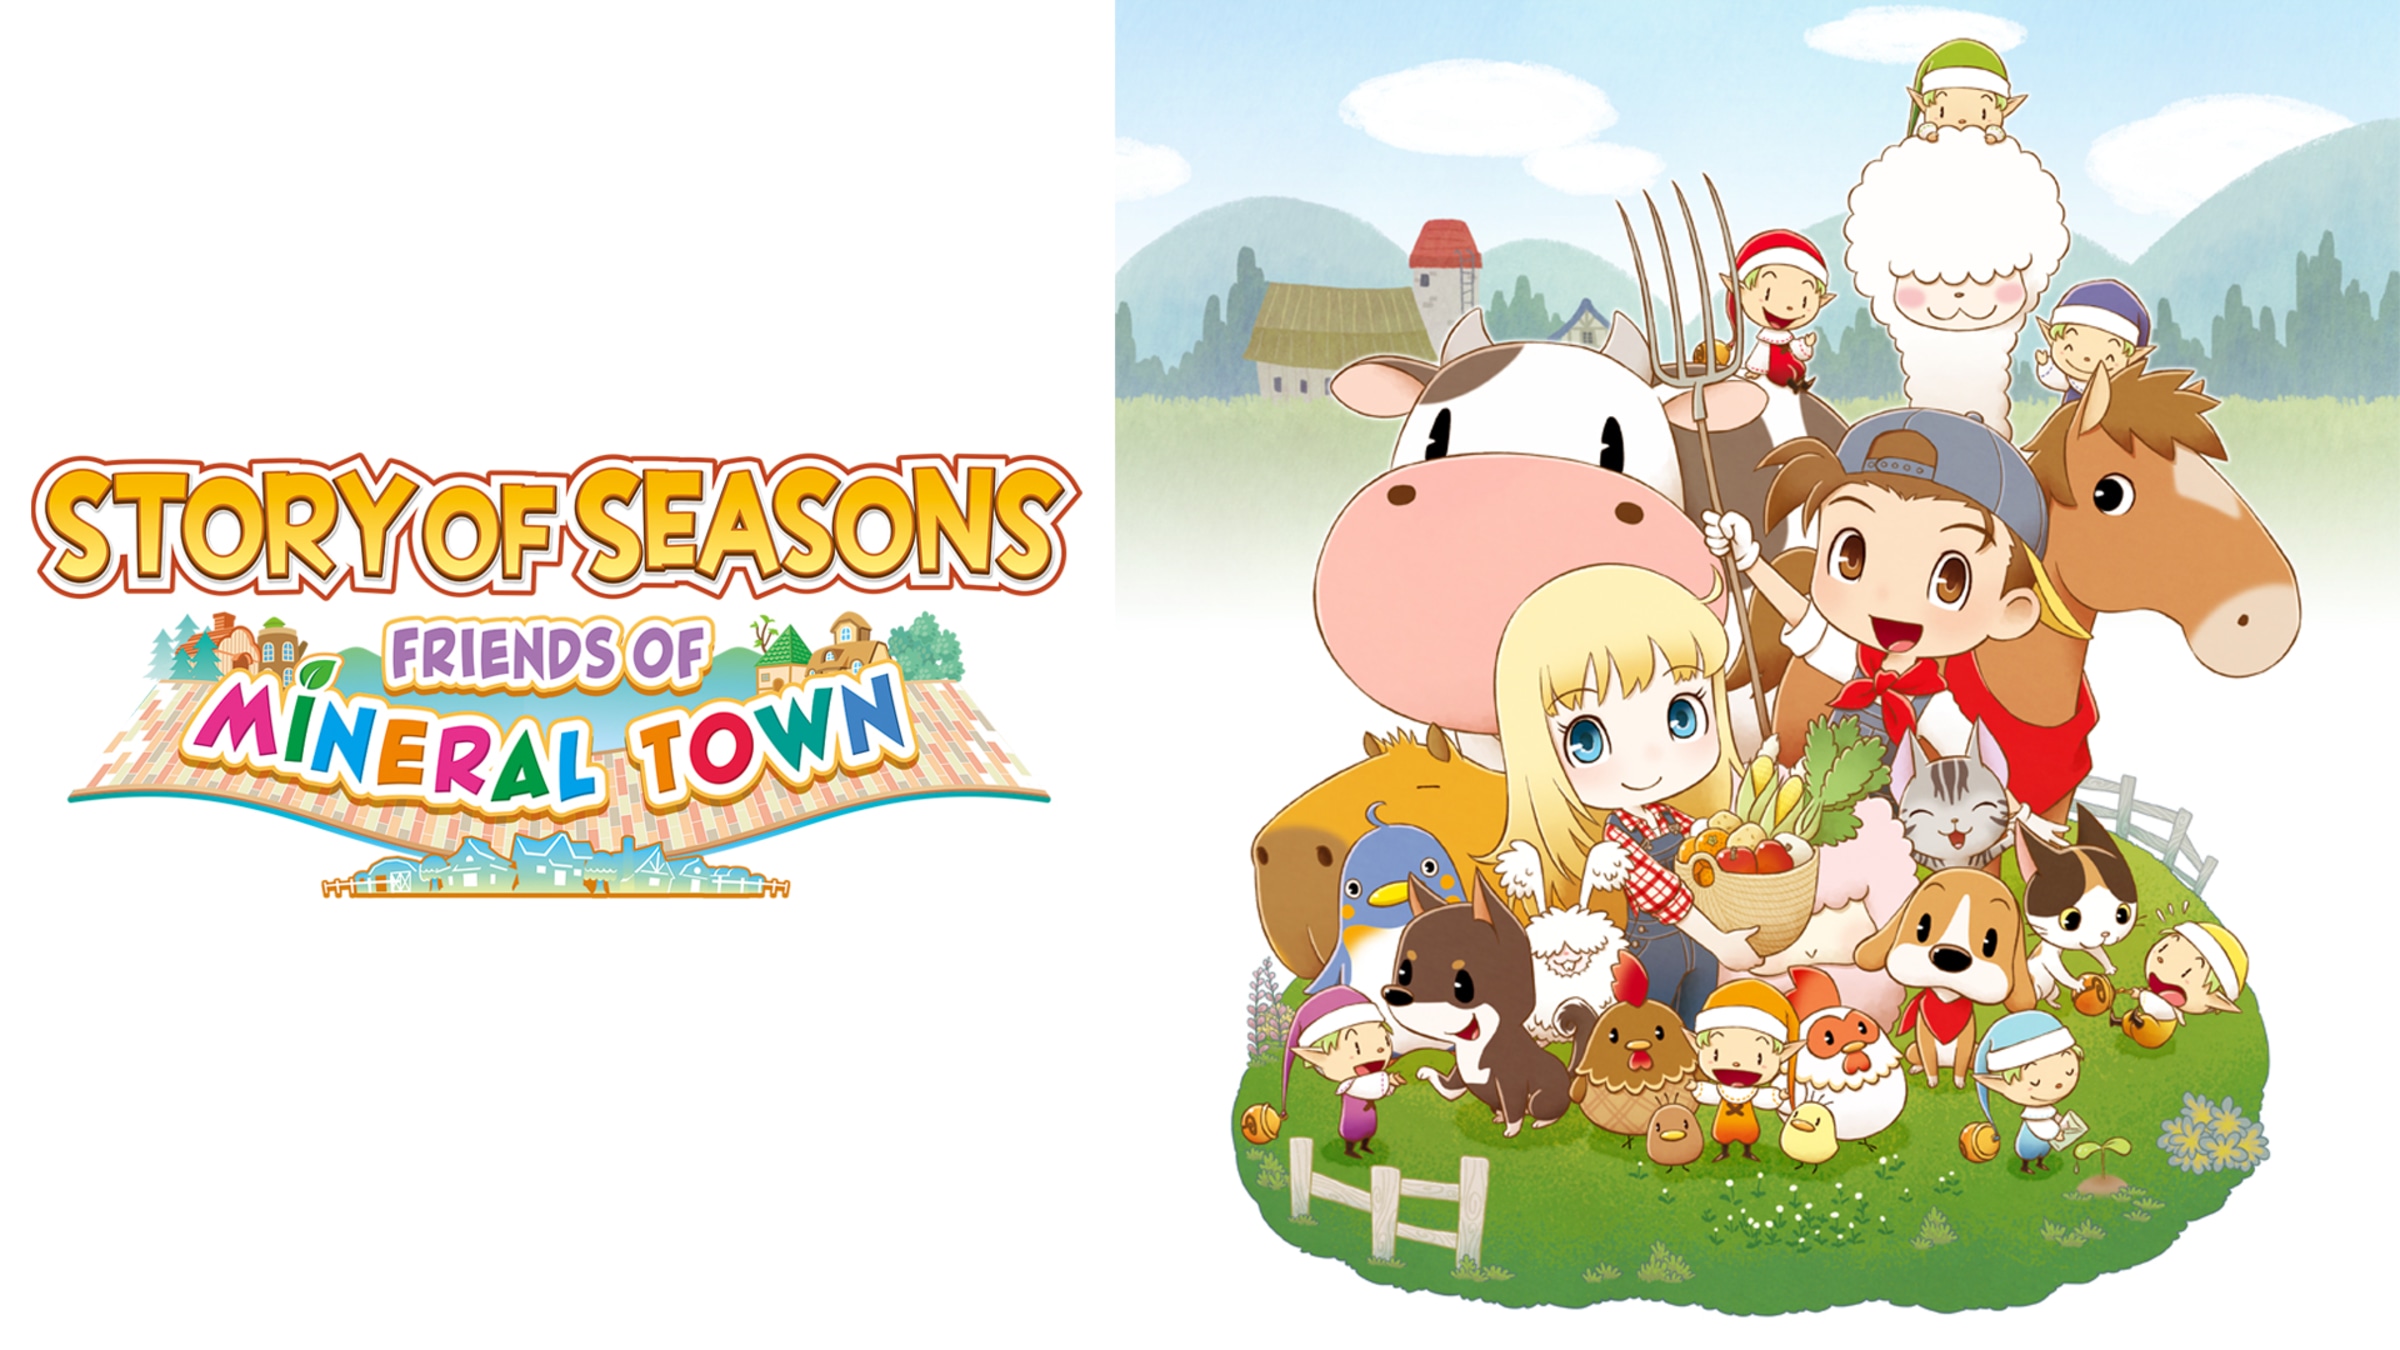 story-of-seasons-friends-of-mineral-town-para-nintendo-switch-site-oficial-da-nintendo